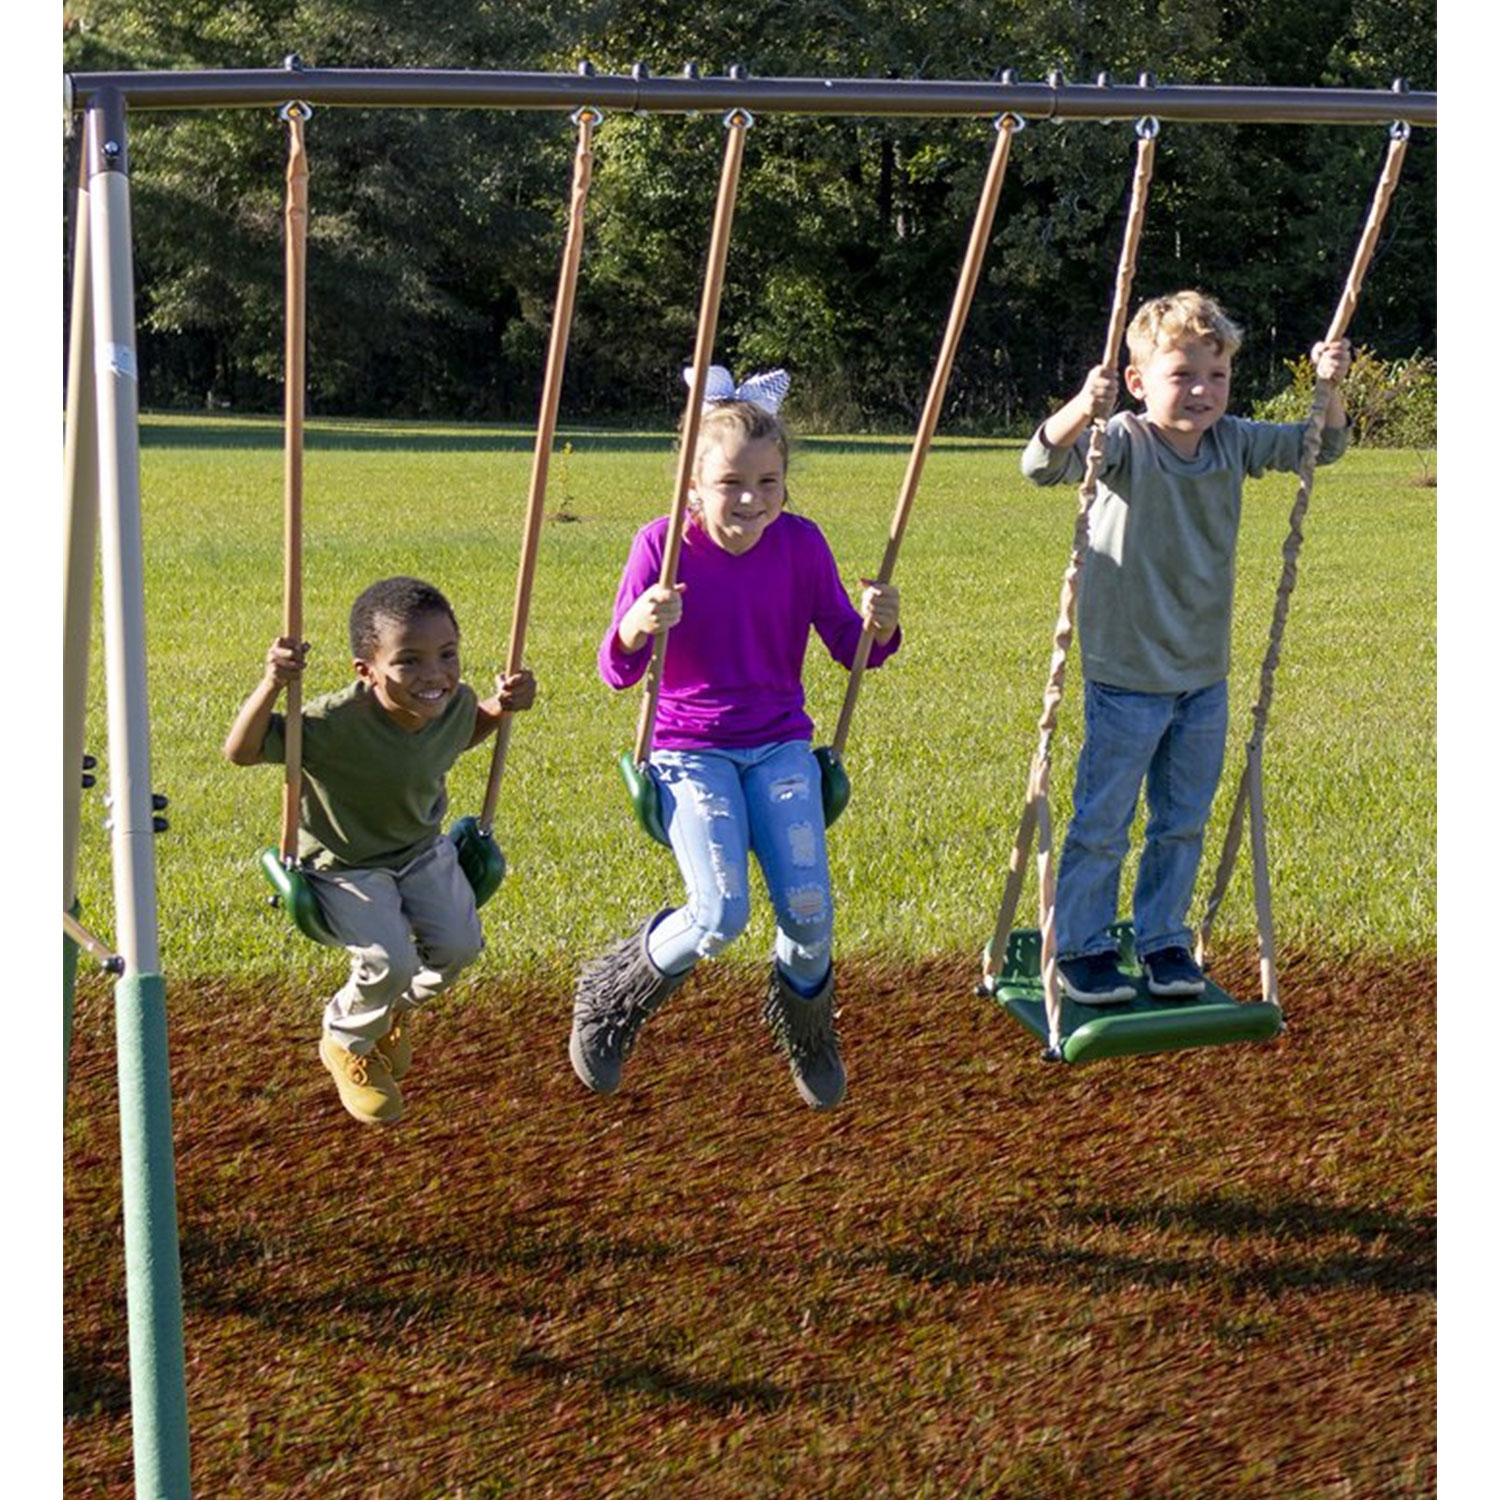 Crestview Swing Set by XDP Recreation with 2 Swing Seats, Stand R Swing, Wave Slide, Fun Glider, & See Saw - image 3 of 7